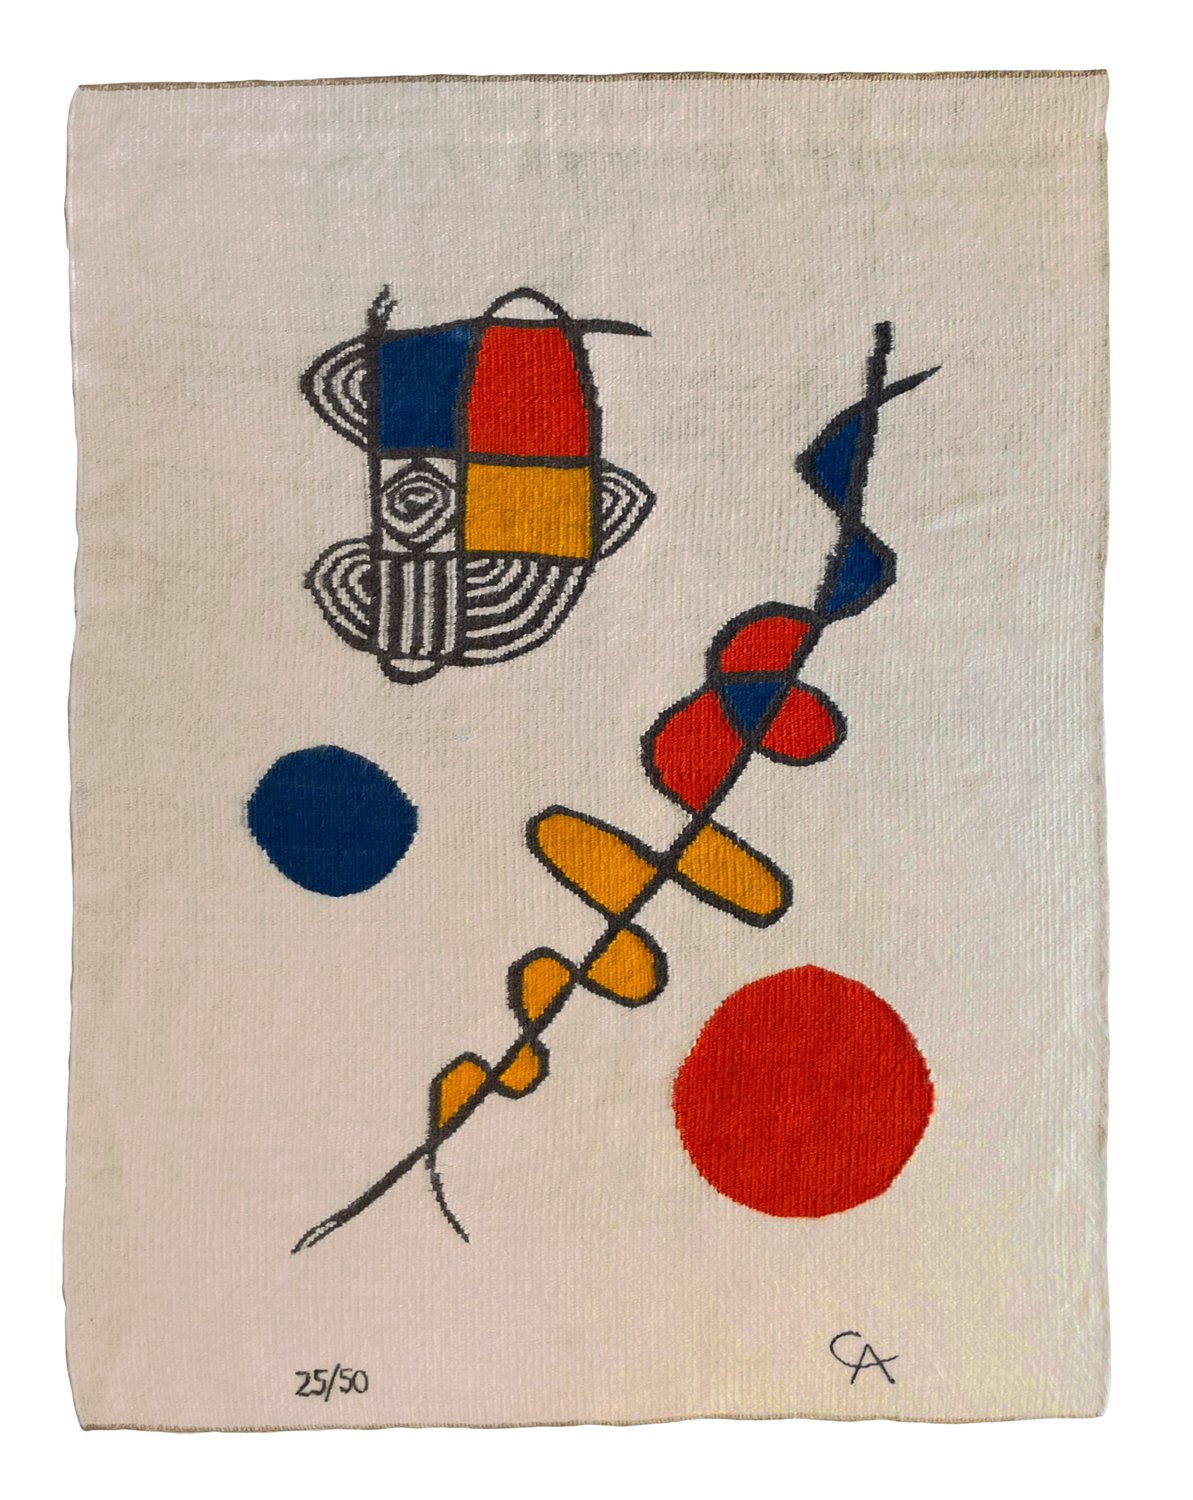 Untitled tapestry